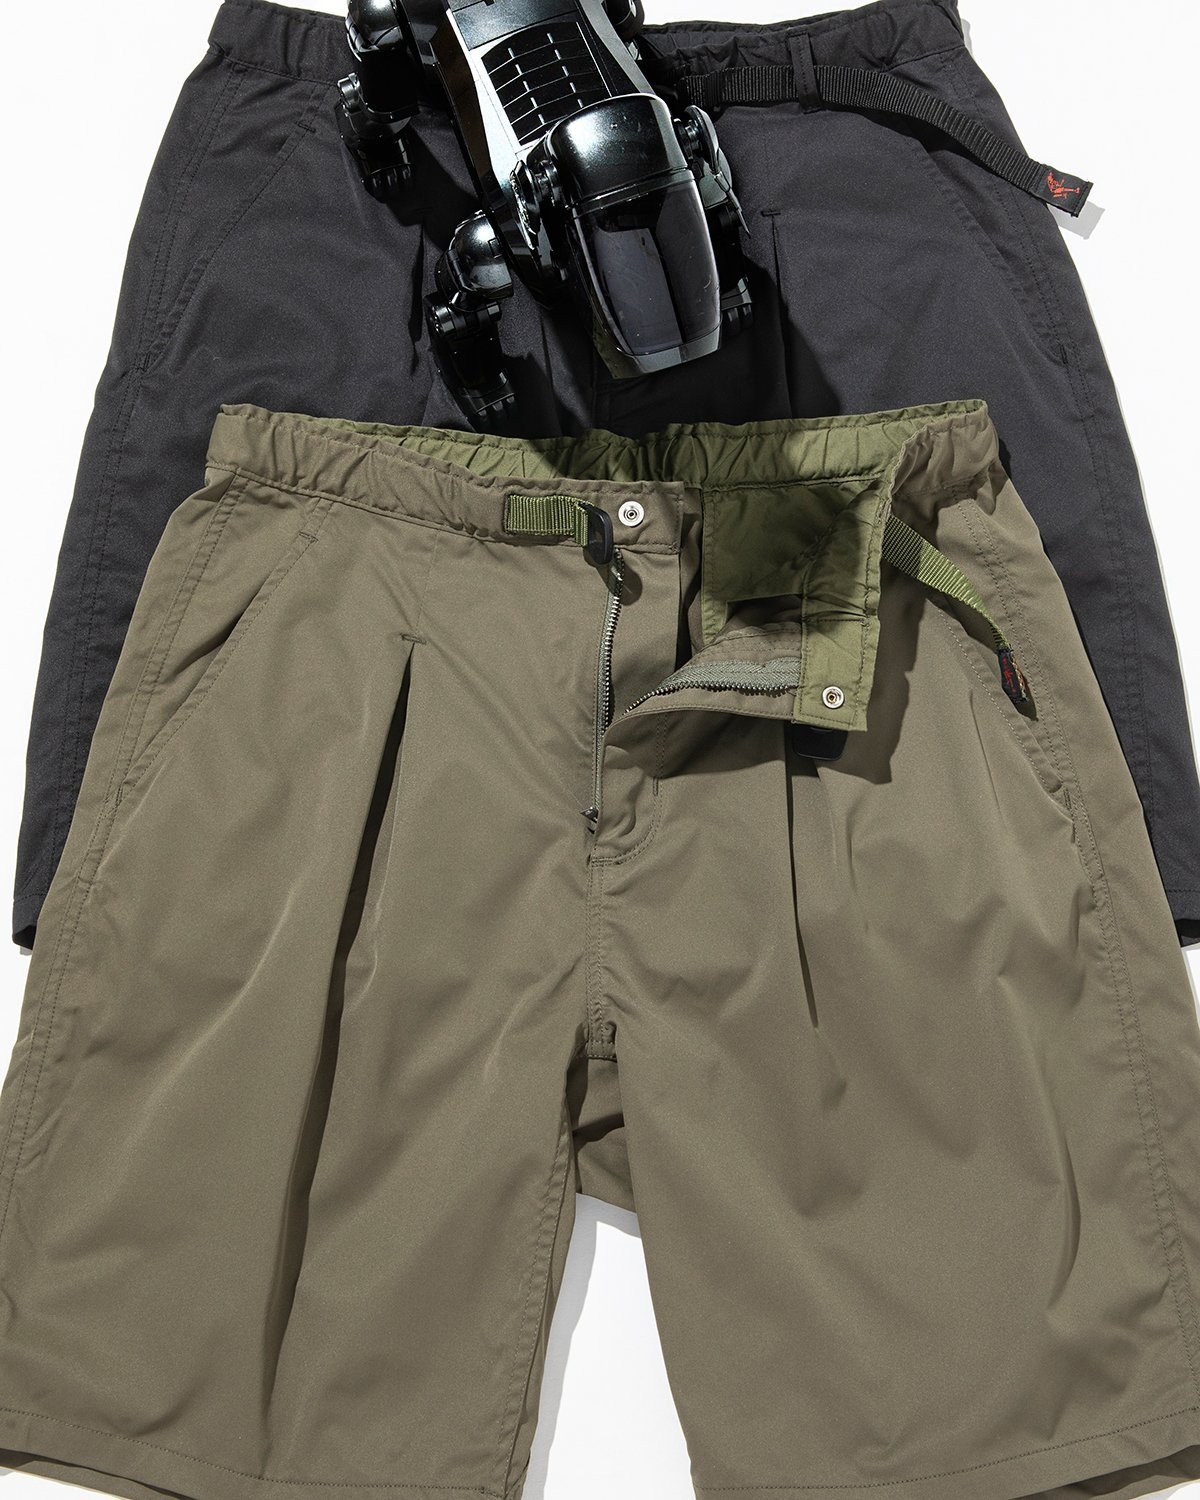 nonnative and Gramicci Update the 'Walker Easy Shorts' for S/S 23